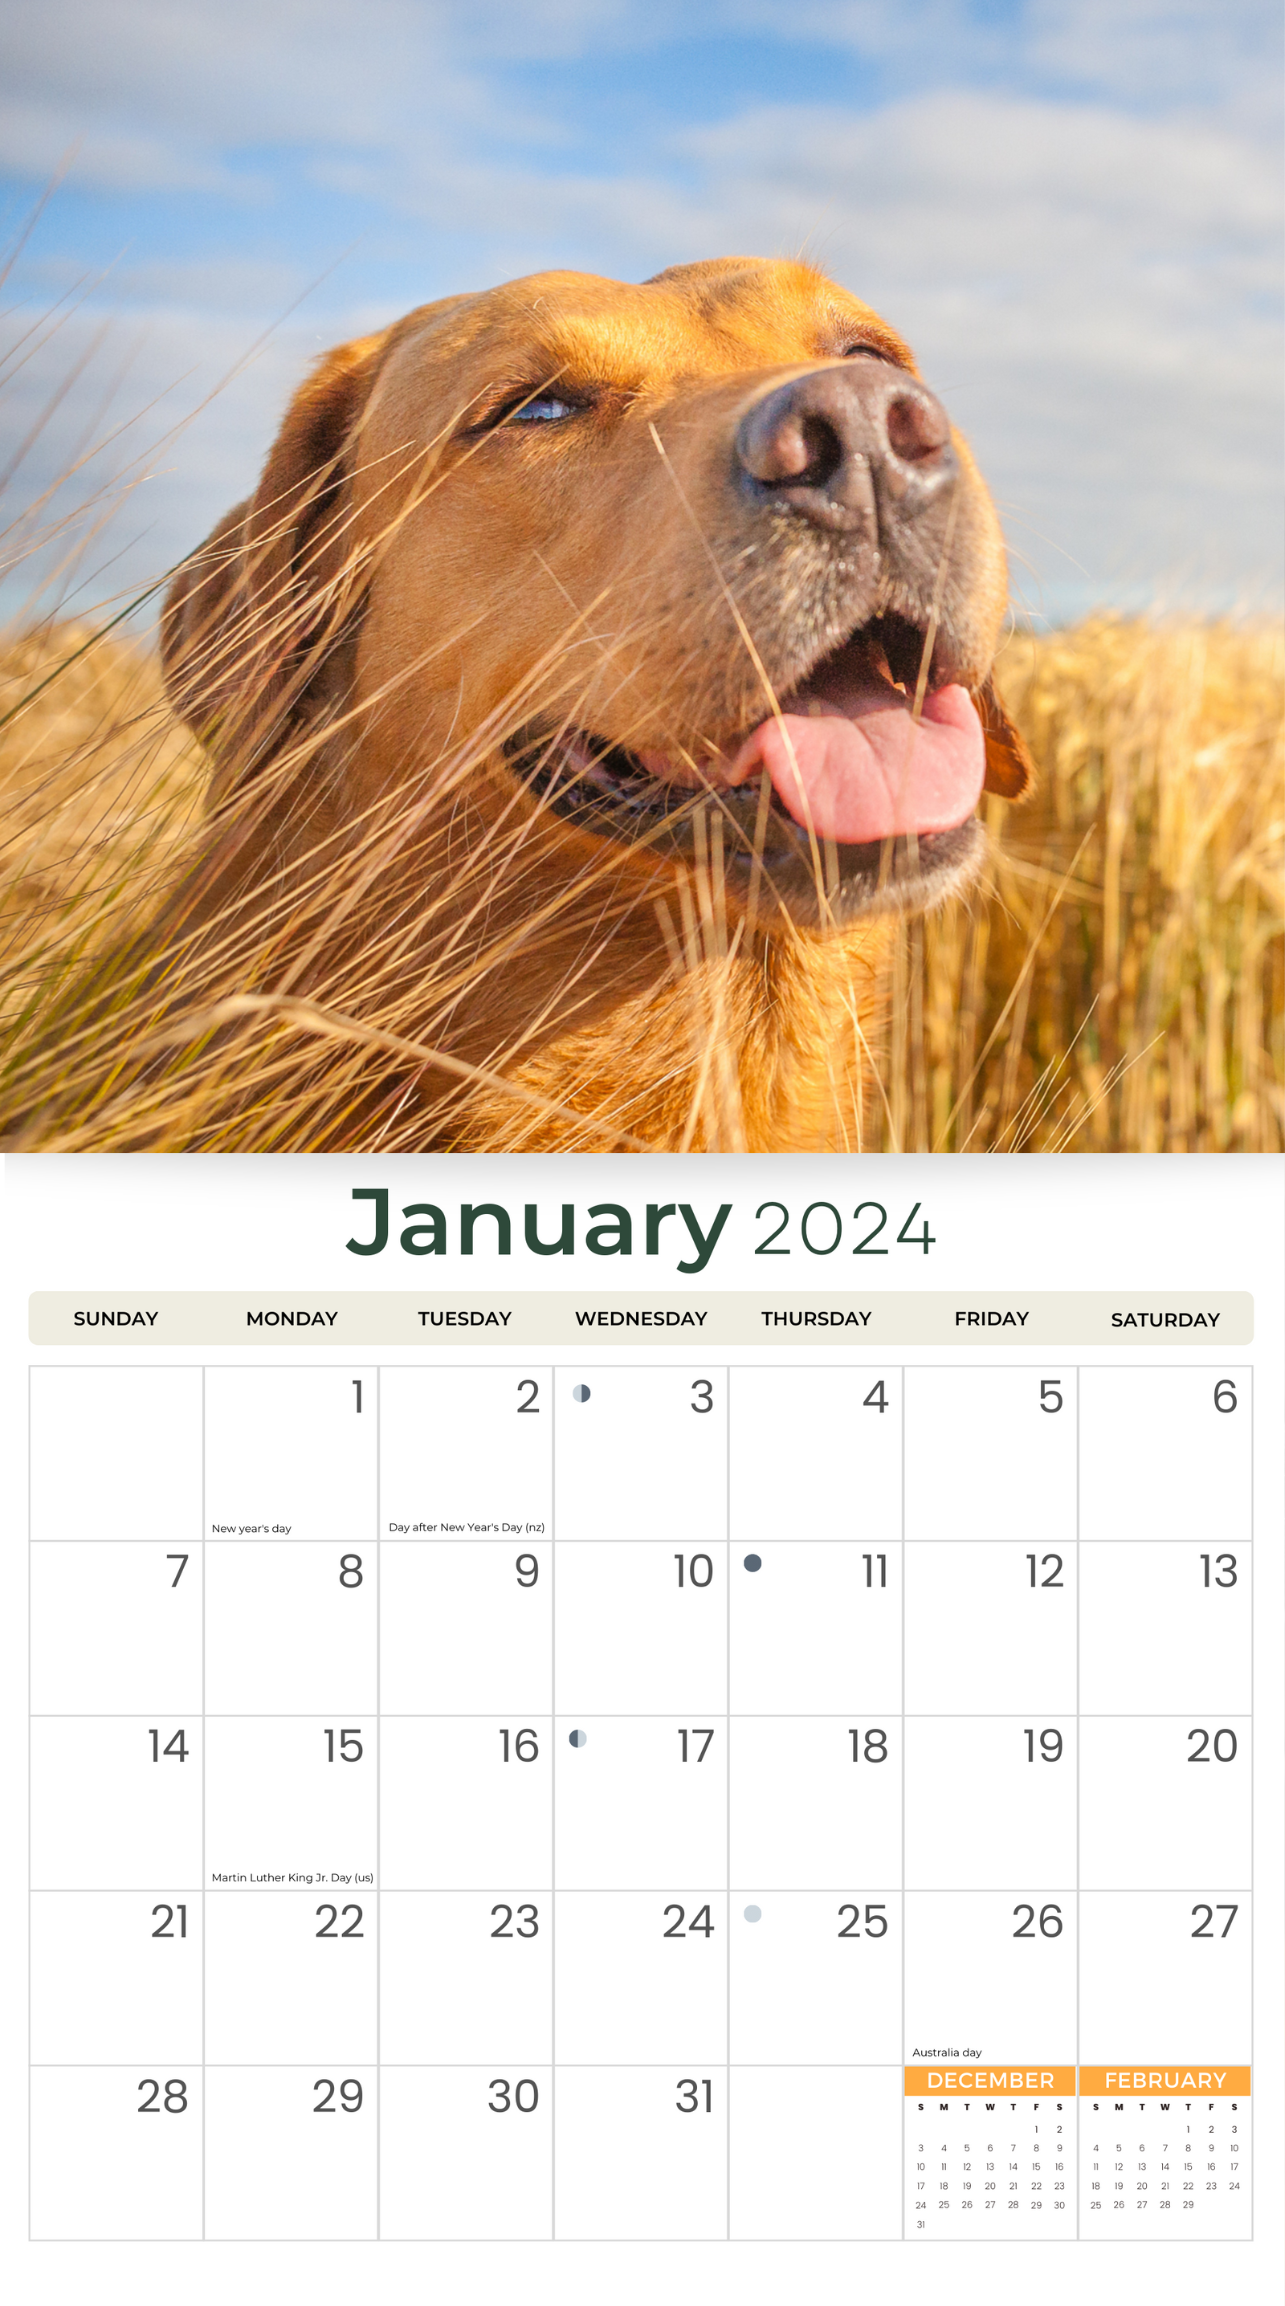 2024 Labrador Retrievers Dogs & Puppies - Deluxe Wall Calendar by Just Calendars - 16 Month - Plastic Free